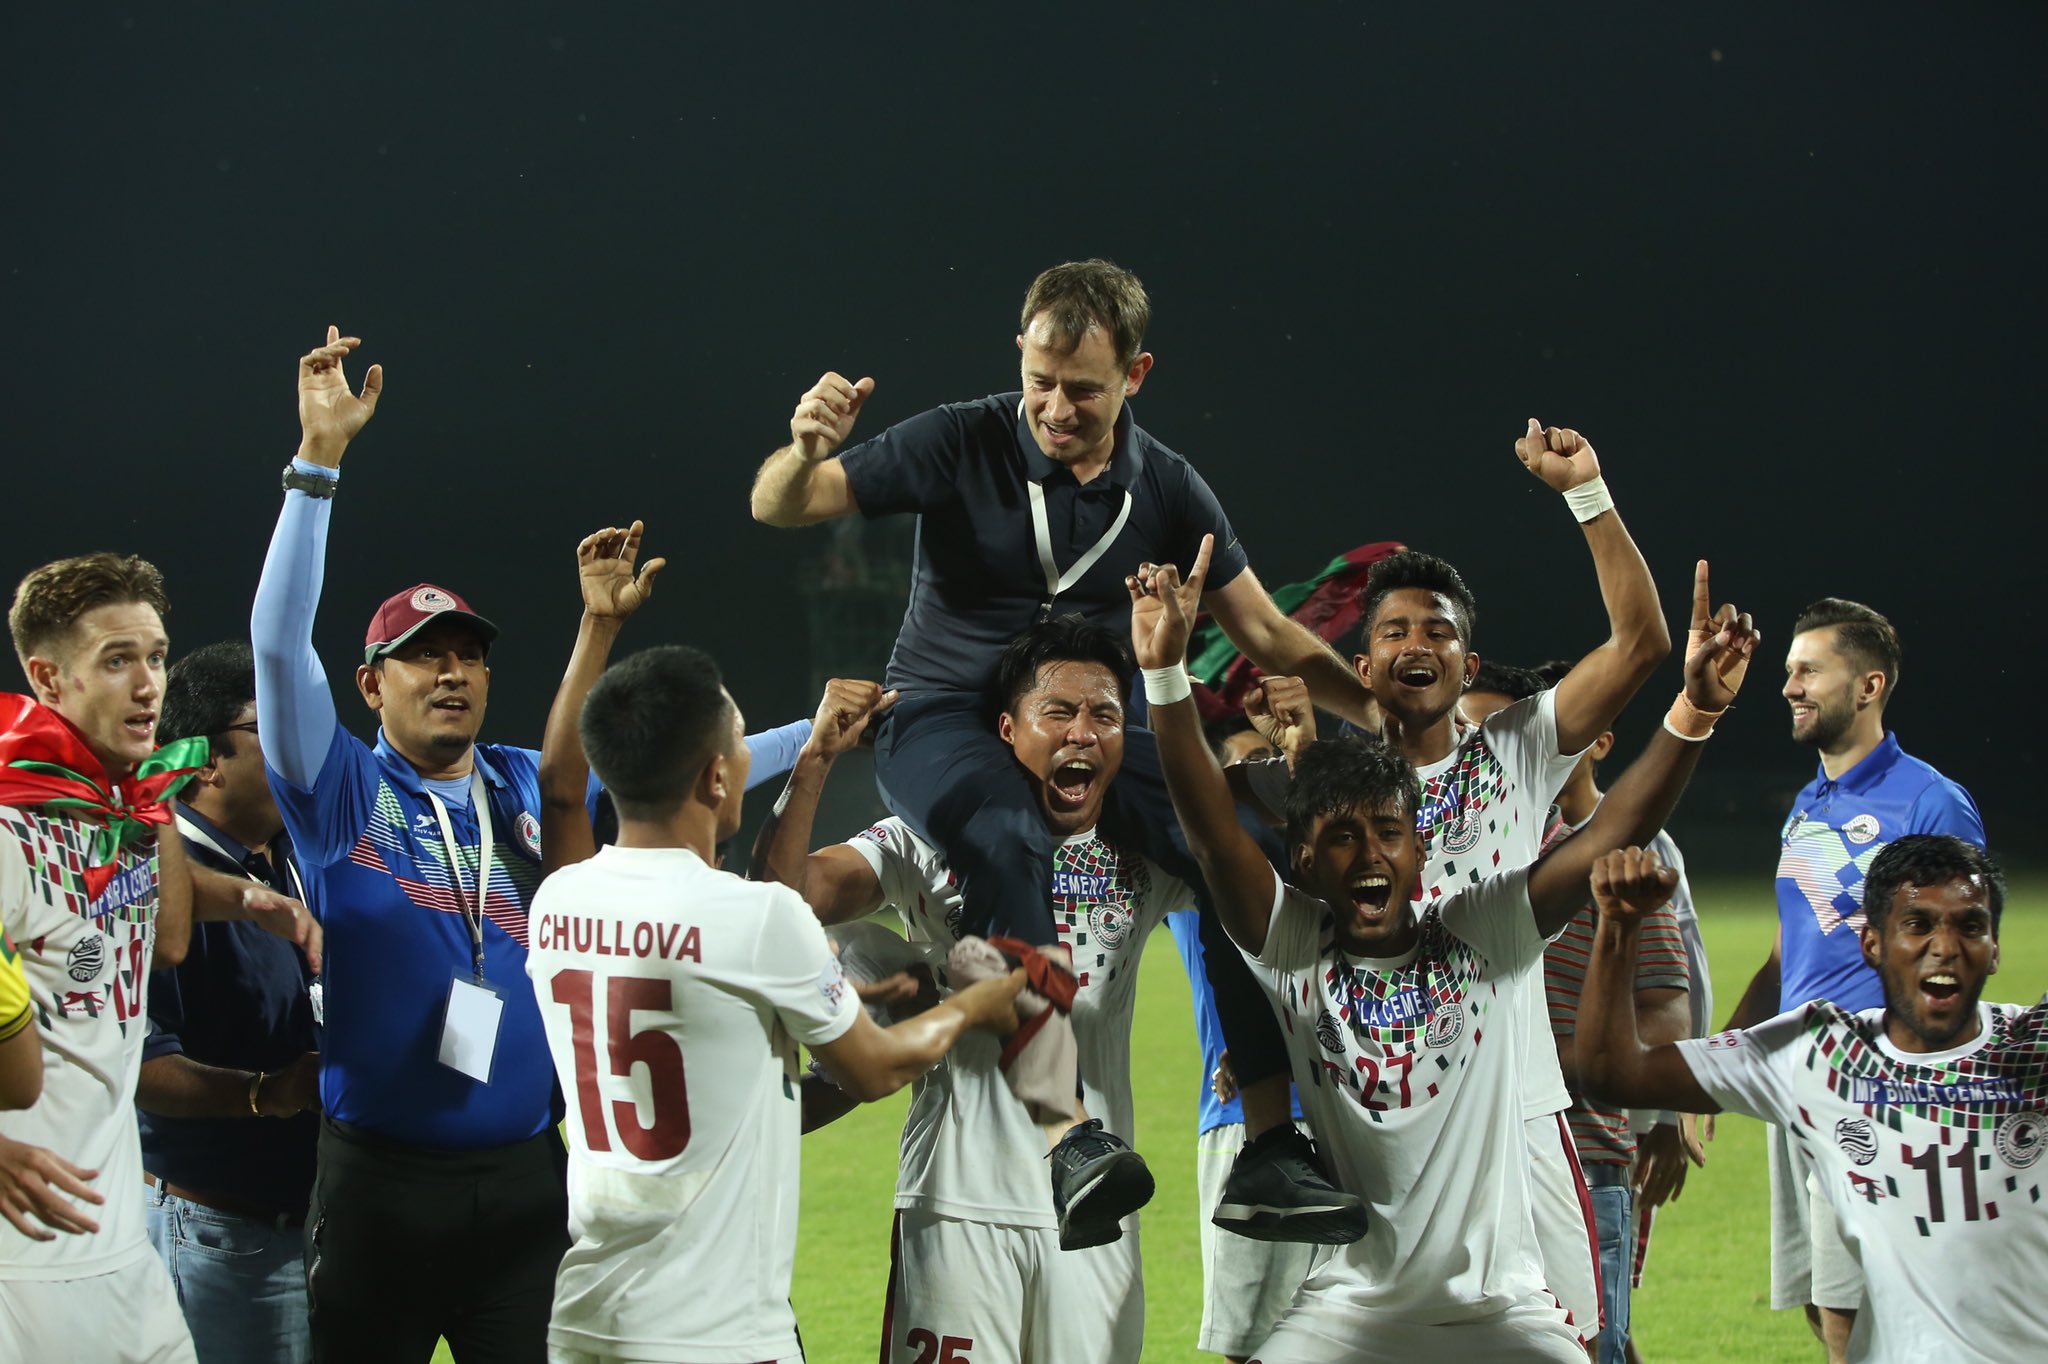 'Rest of I-League canceled, Mohun Bagan to be crowned champions,' states AIFF